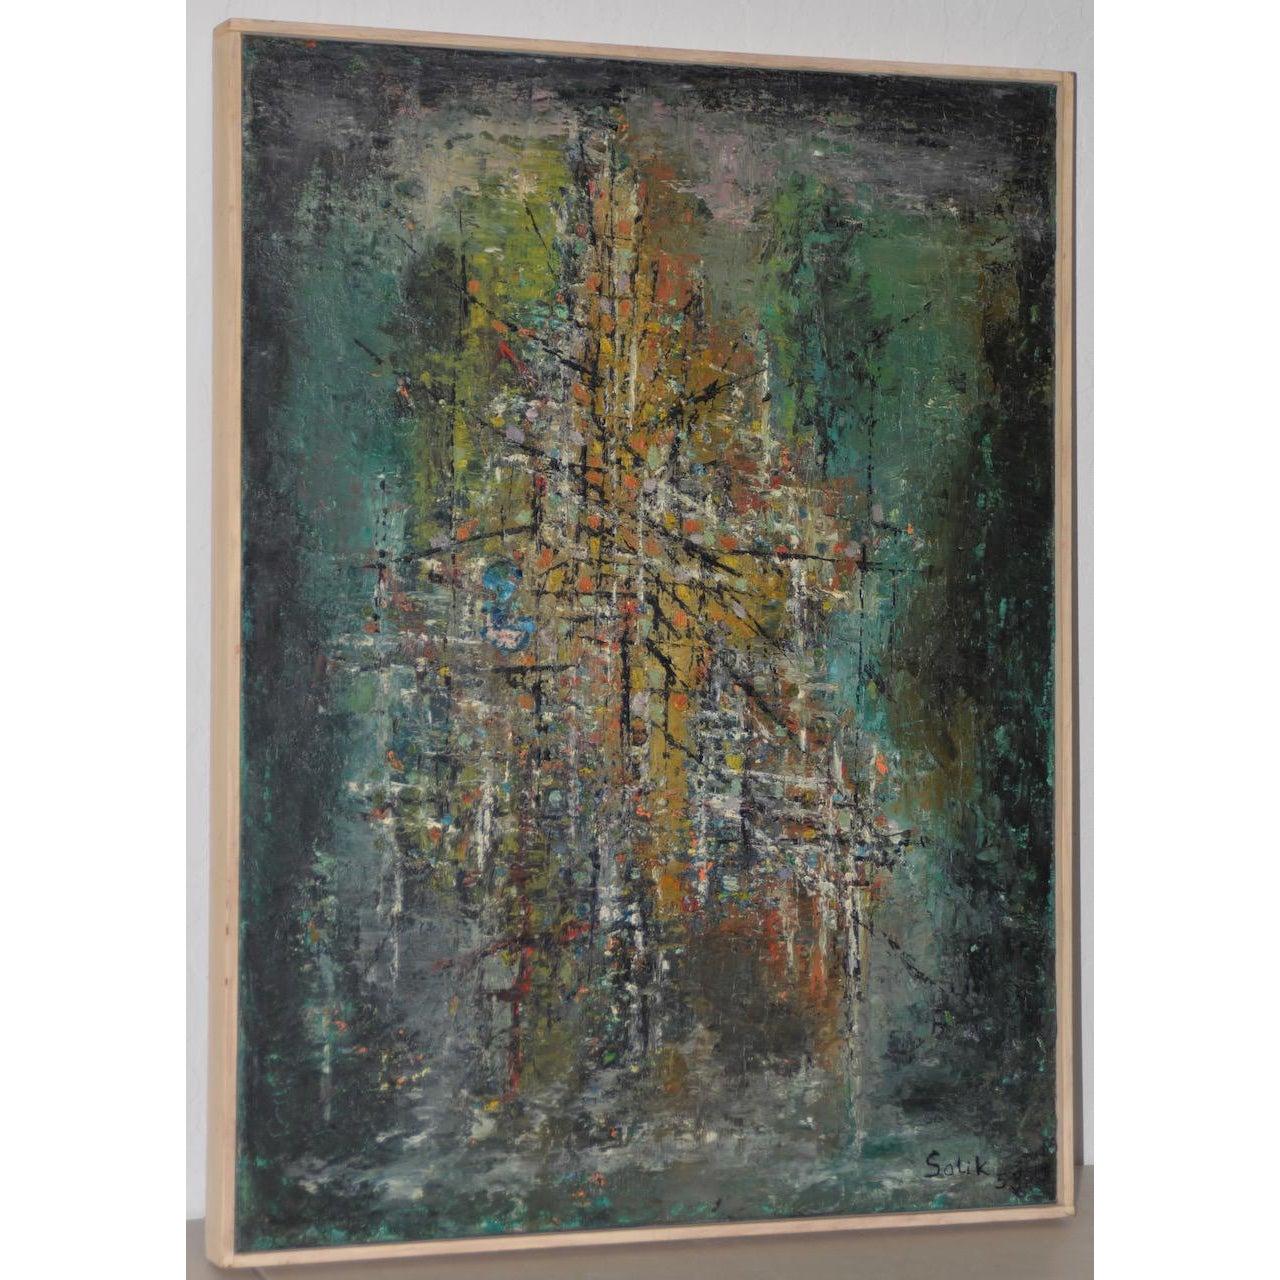 Classic Mid Century Modern Abstract Painting by Solik c.1959